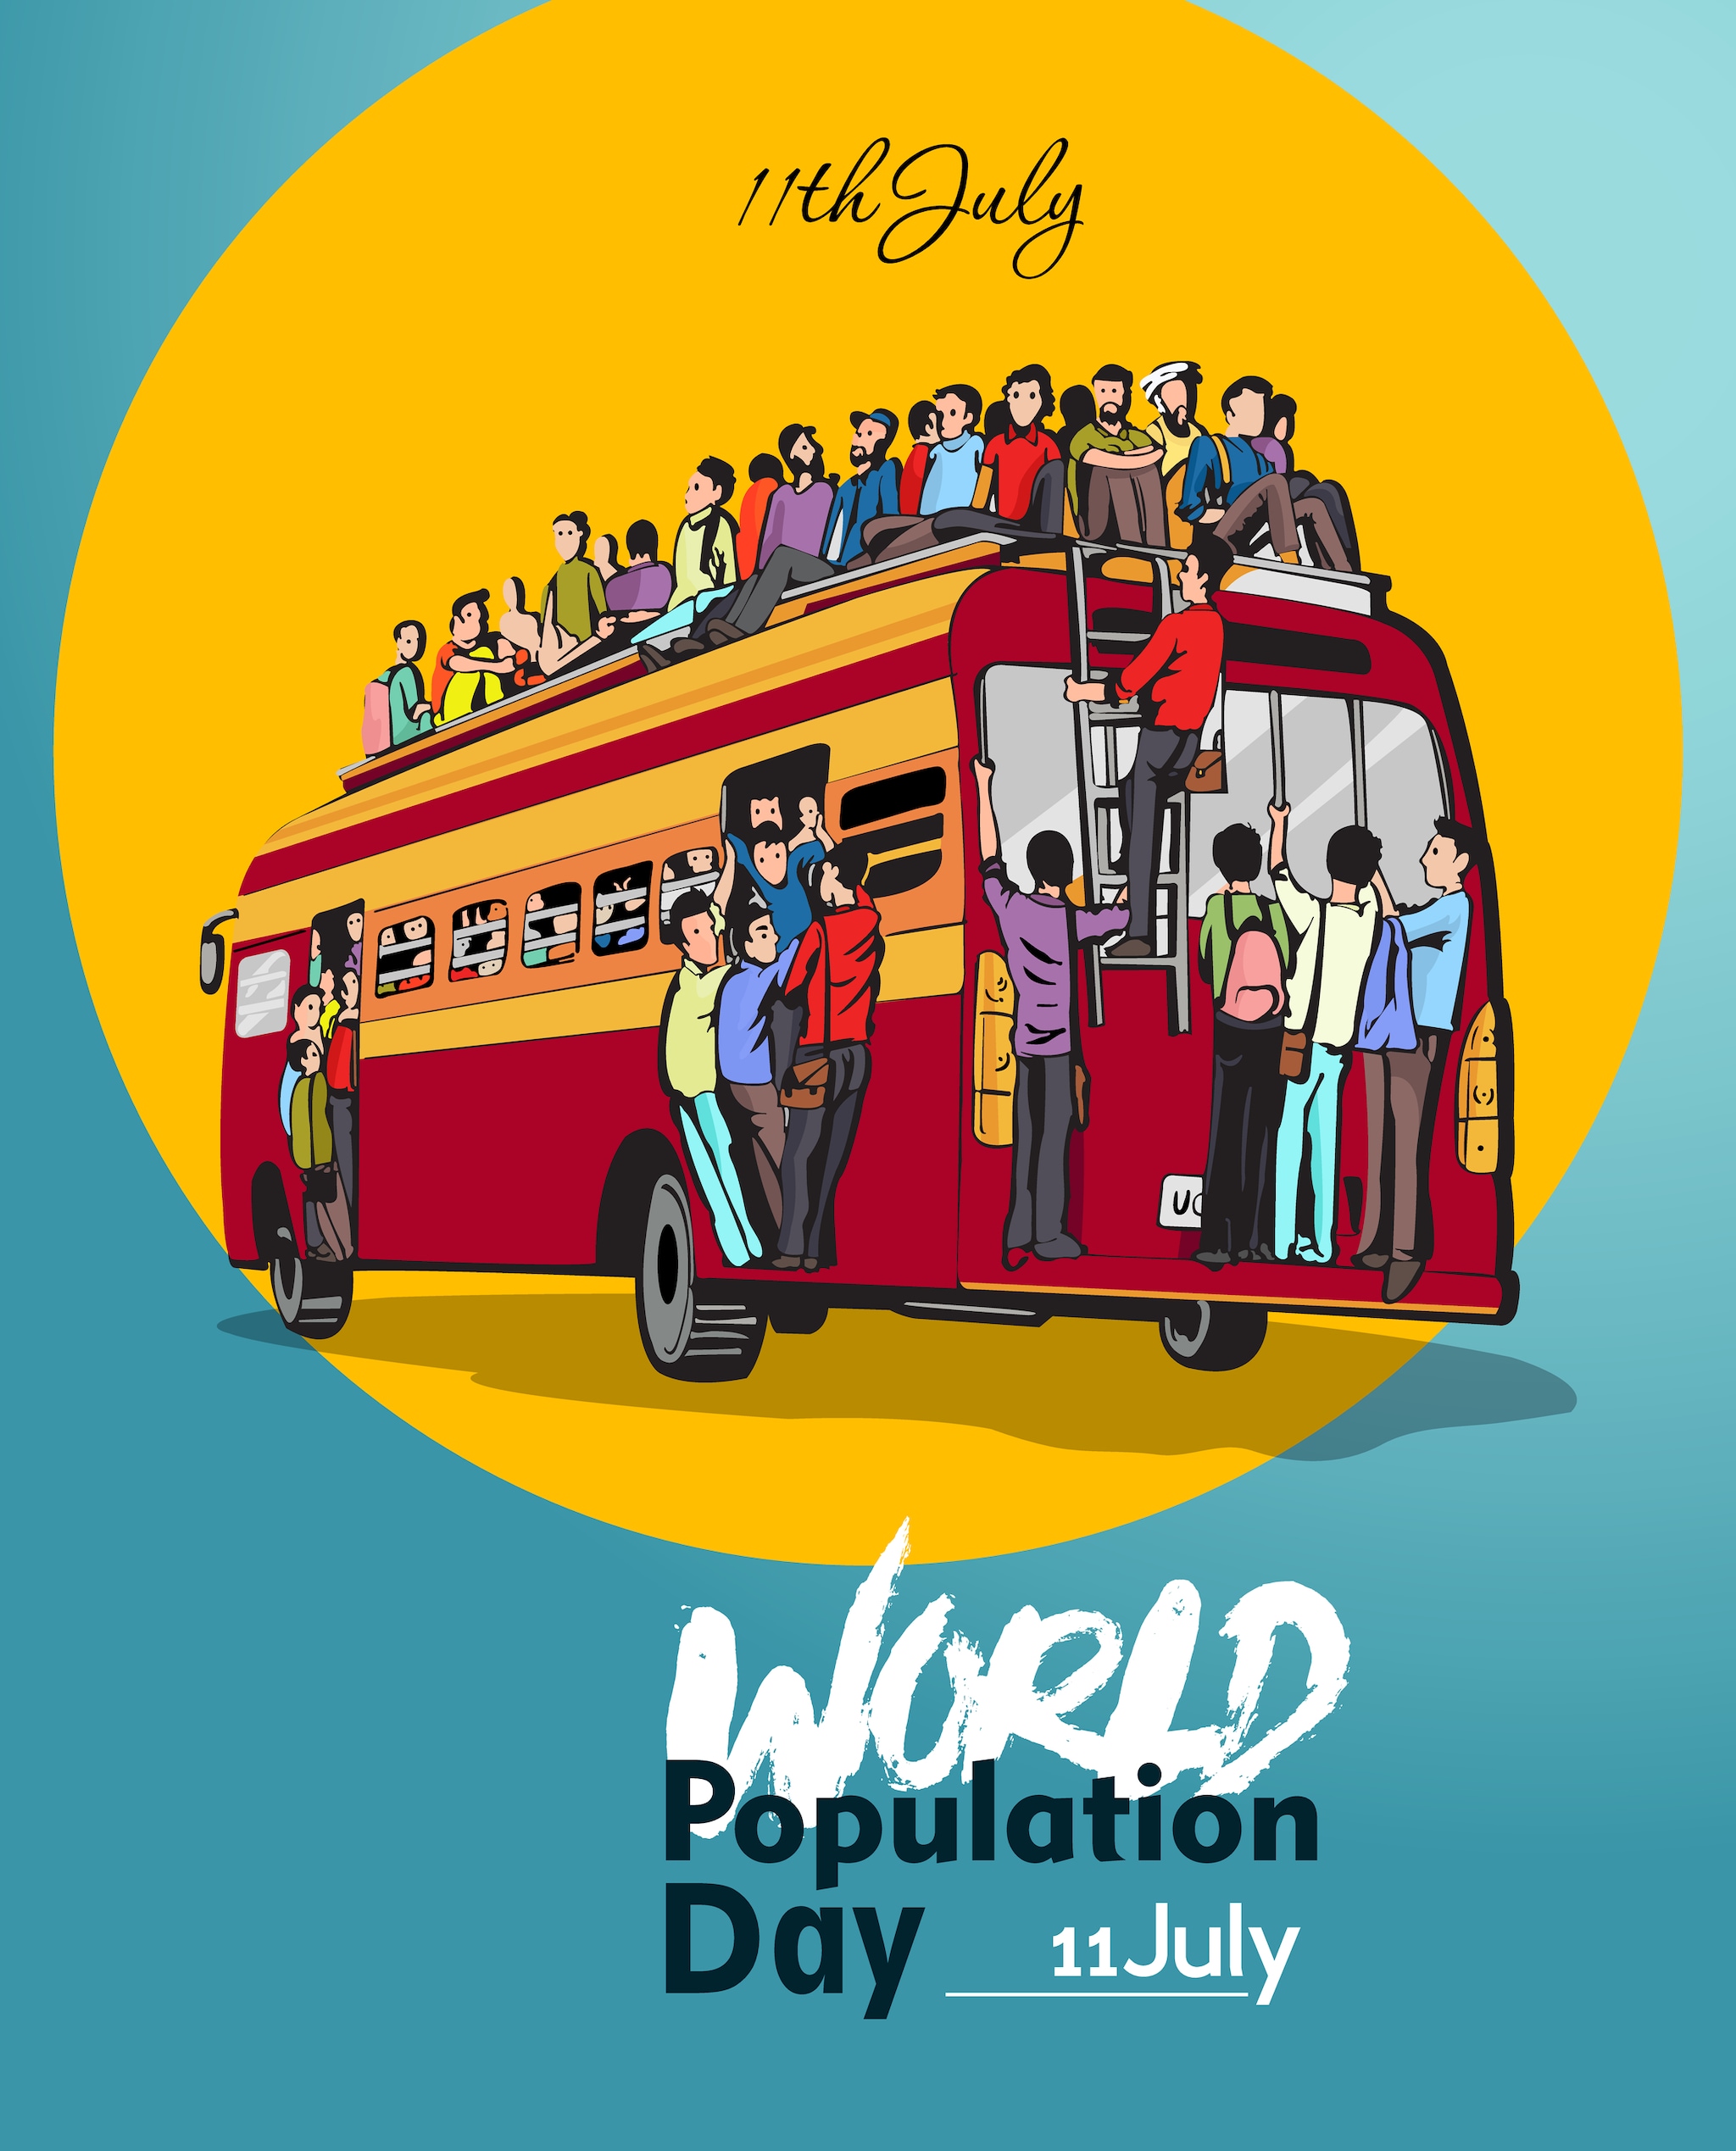 Population Day 2022 Wishes, Greetings, Whatsapp Status, Images and Quotes that you can share with your loved ones.  (Image: Shutterstock) 